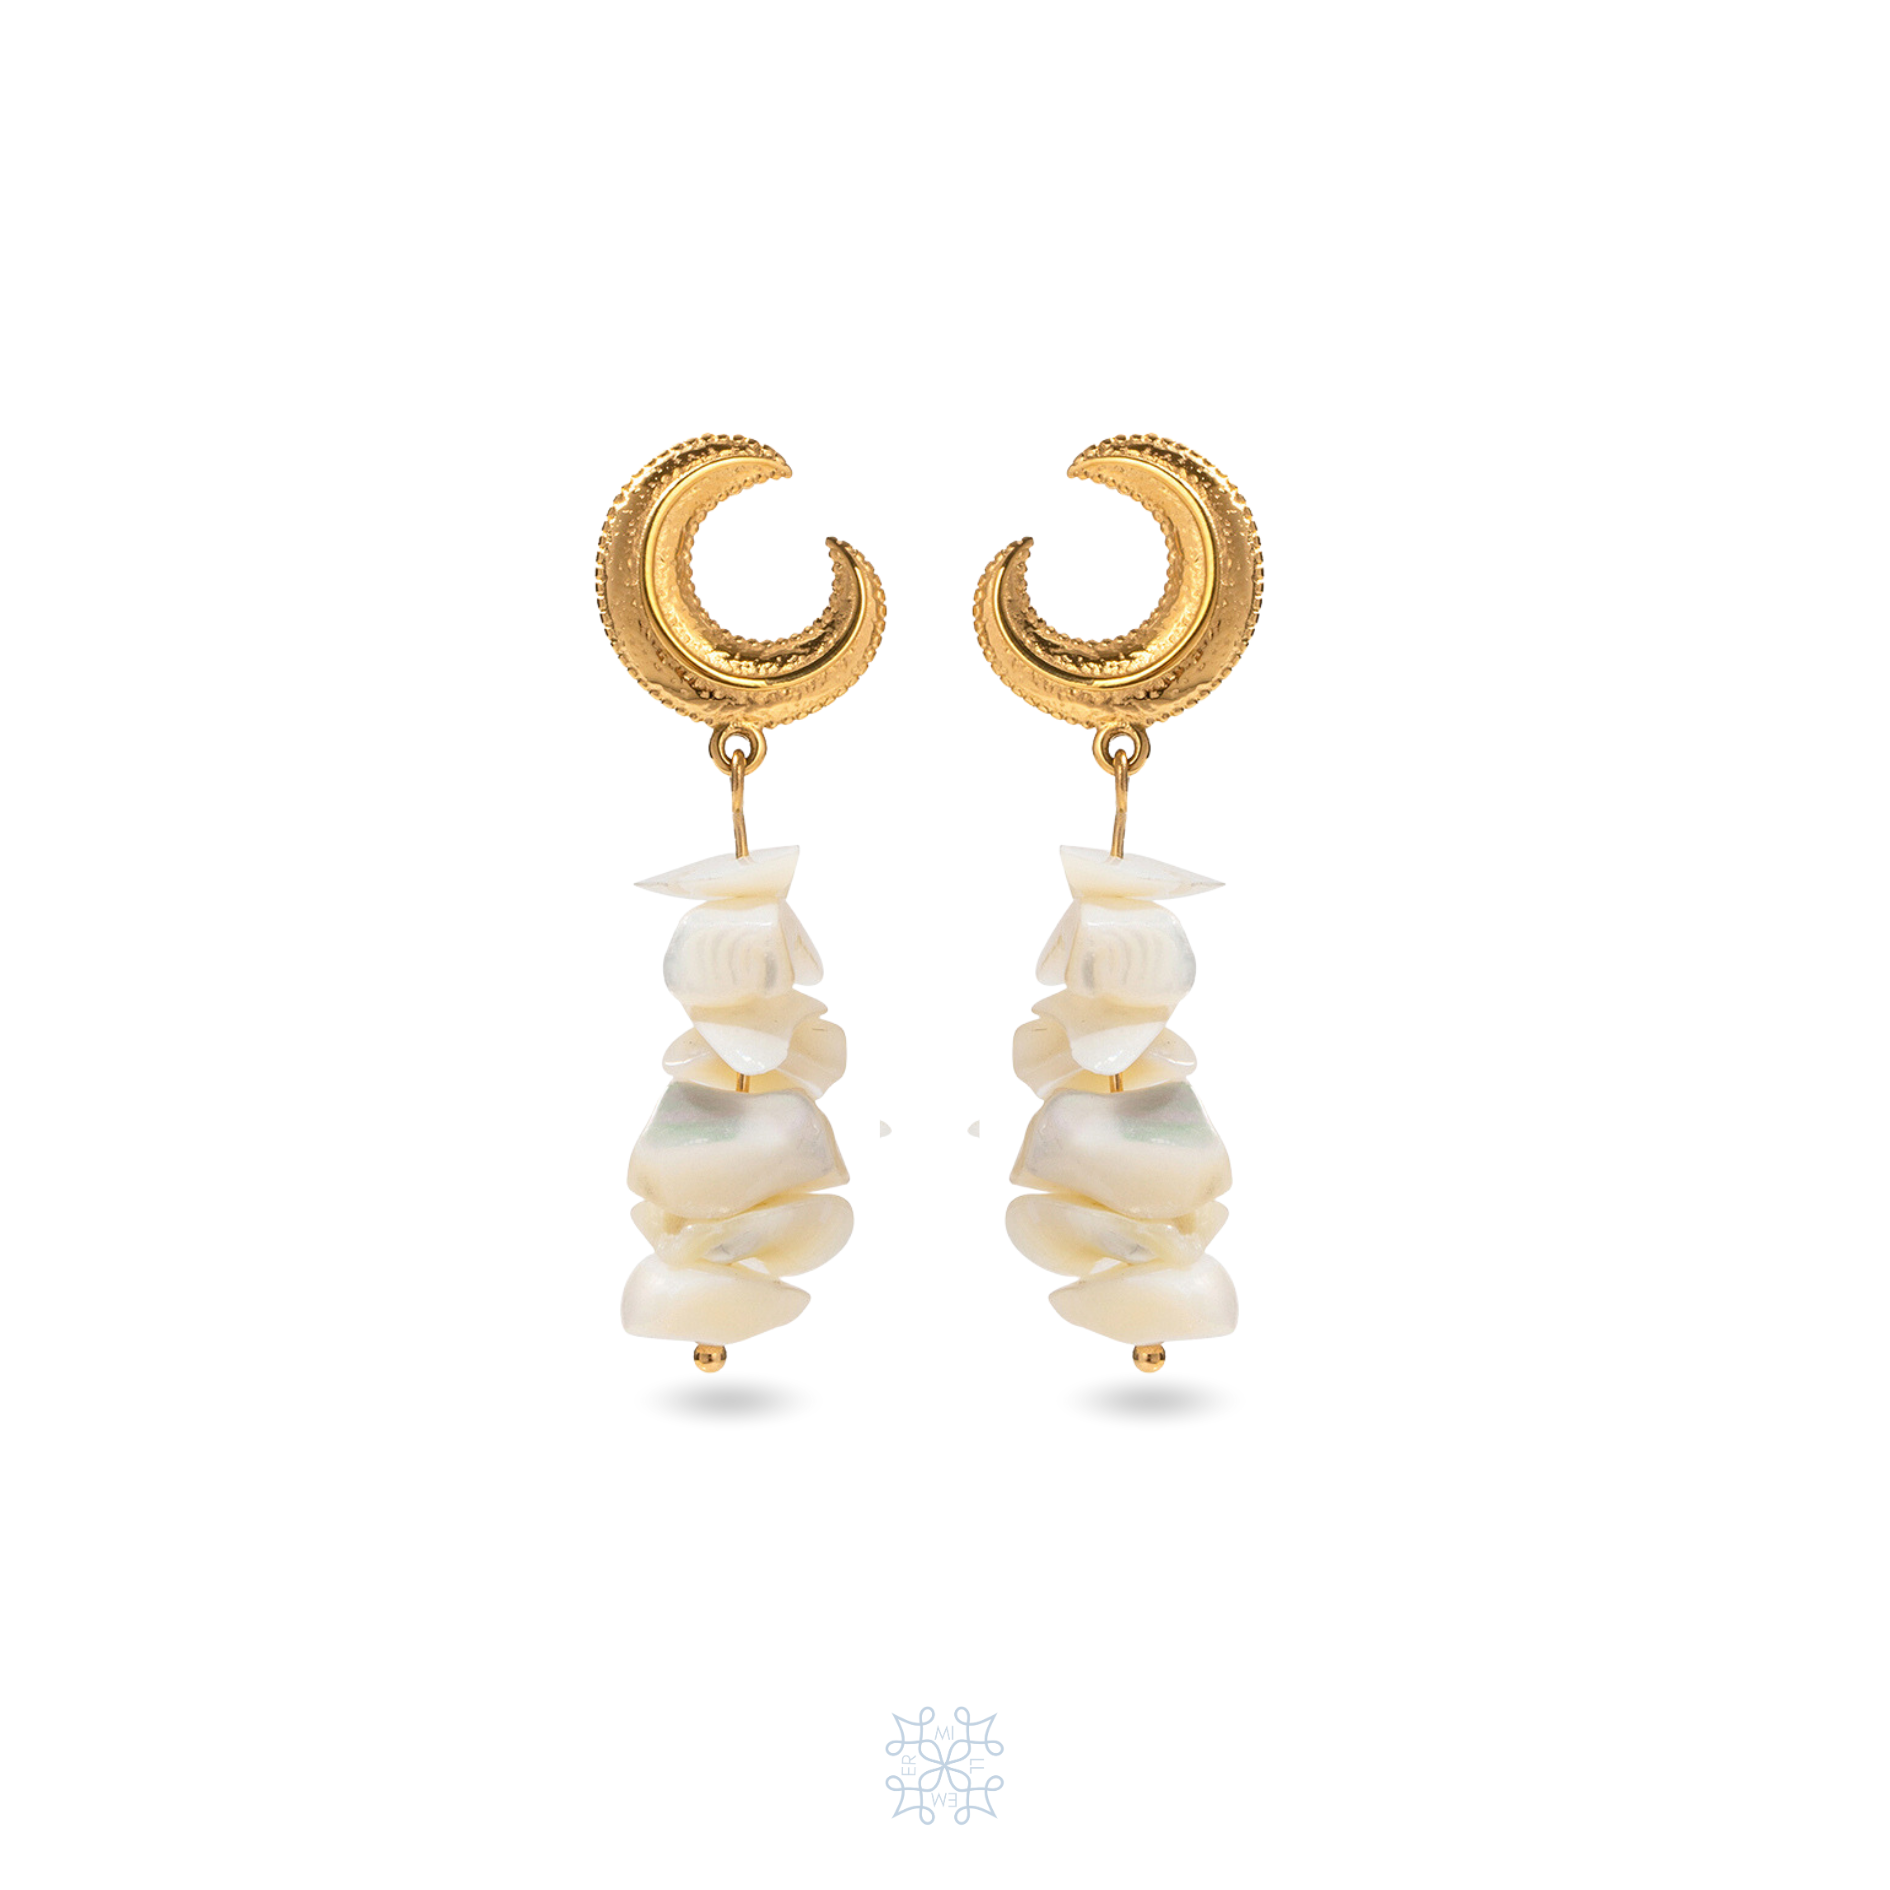 LUNAR irregular baroque white stonepieces attached one with another forming a drop earring. At the top is a gold half moon shaped gold piece.